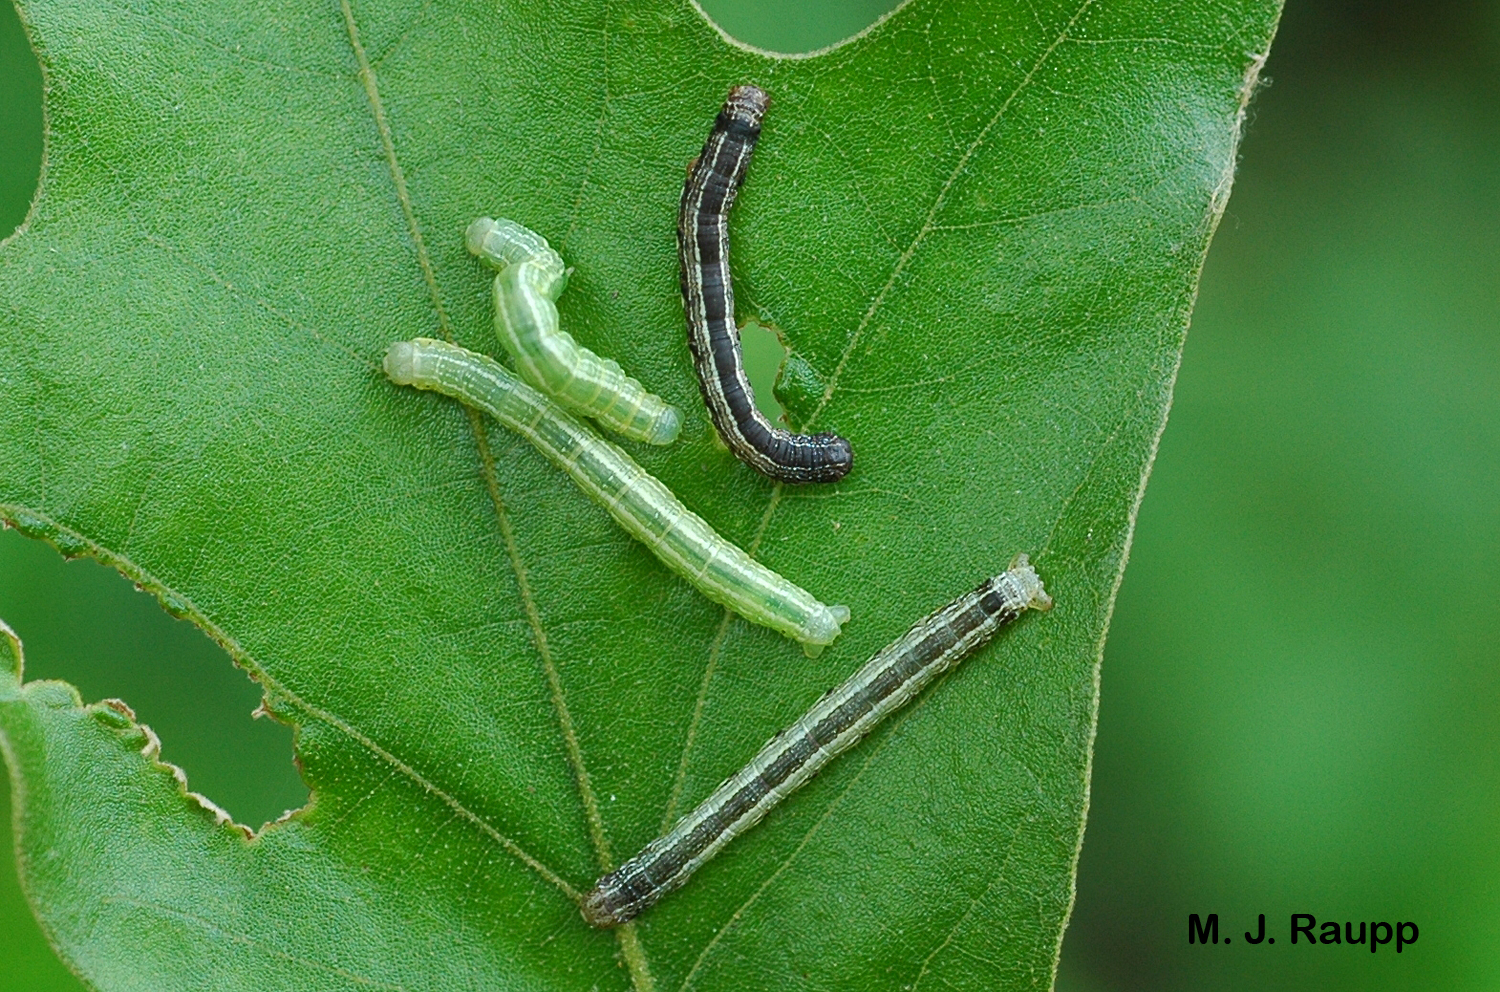 Cankerworm Incursion: Deciphering the Menace to Arboreal Health